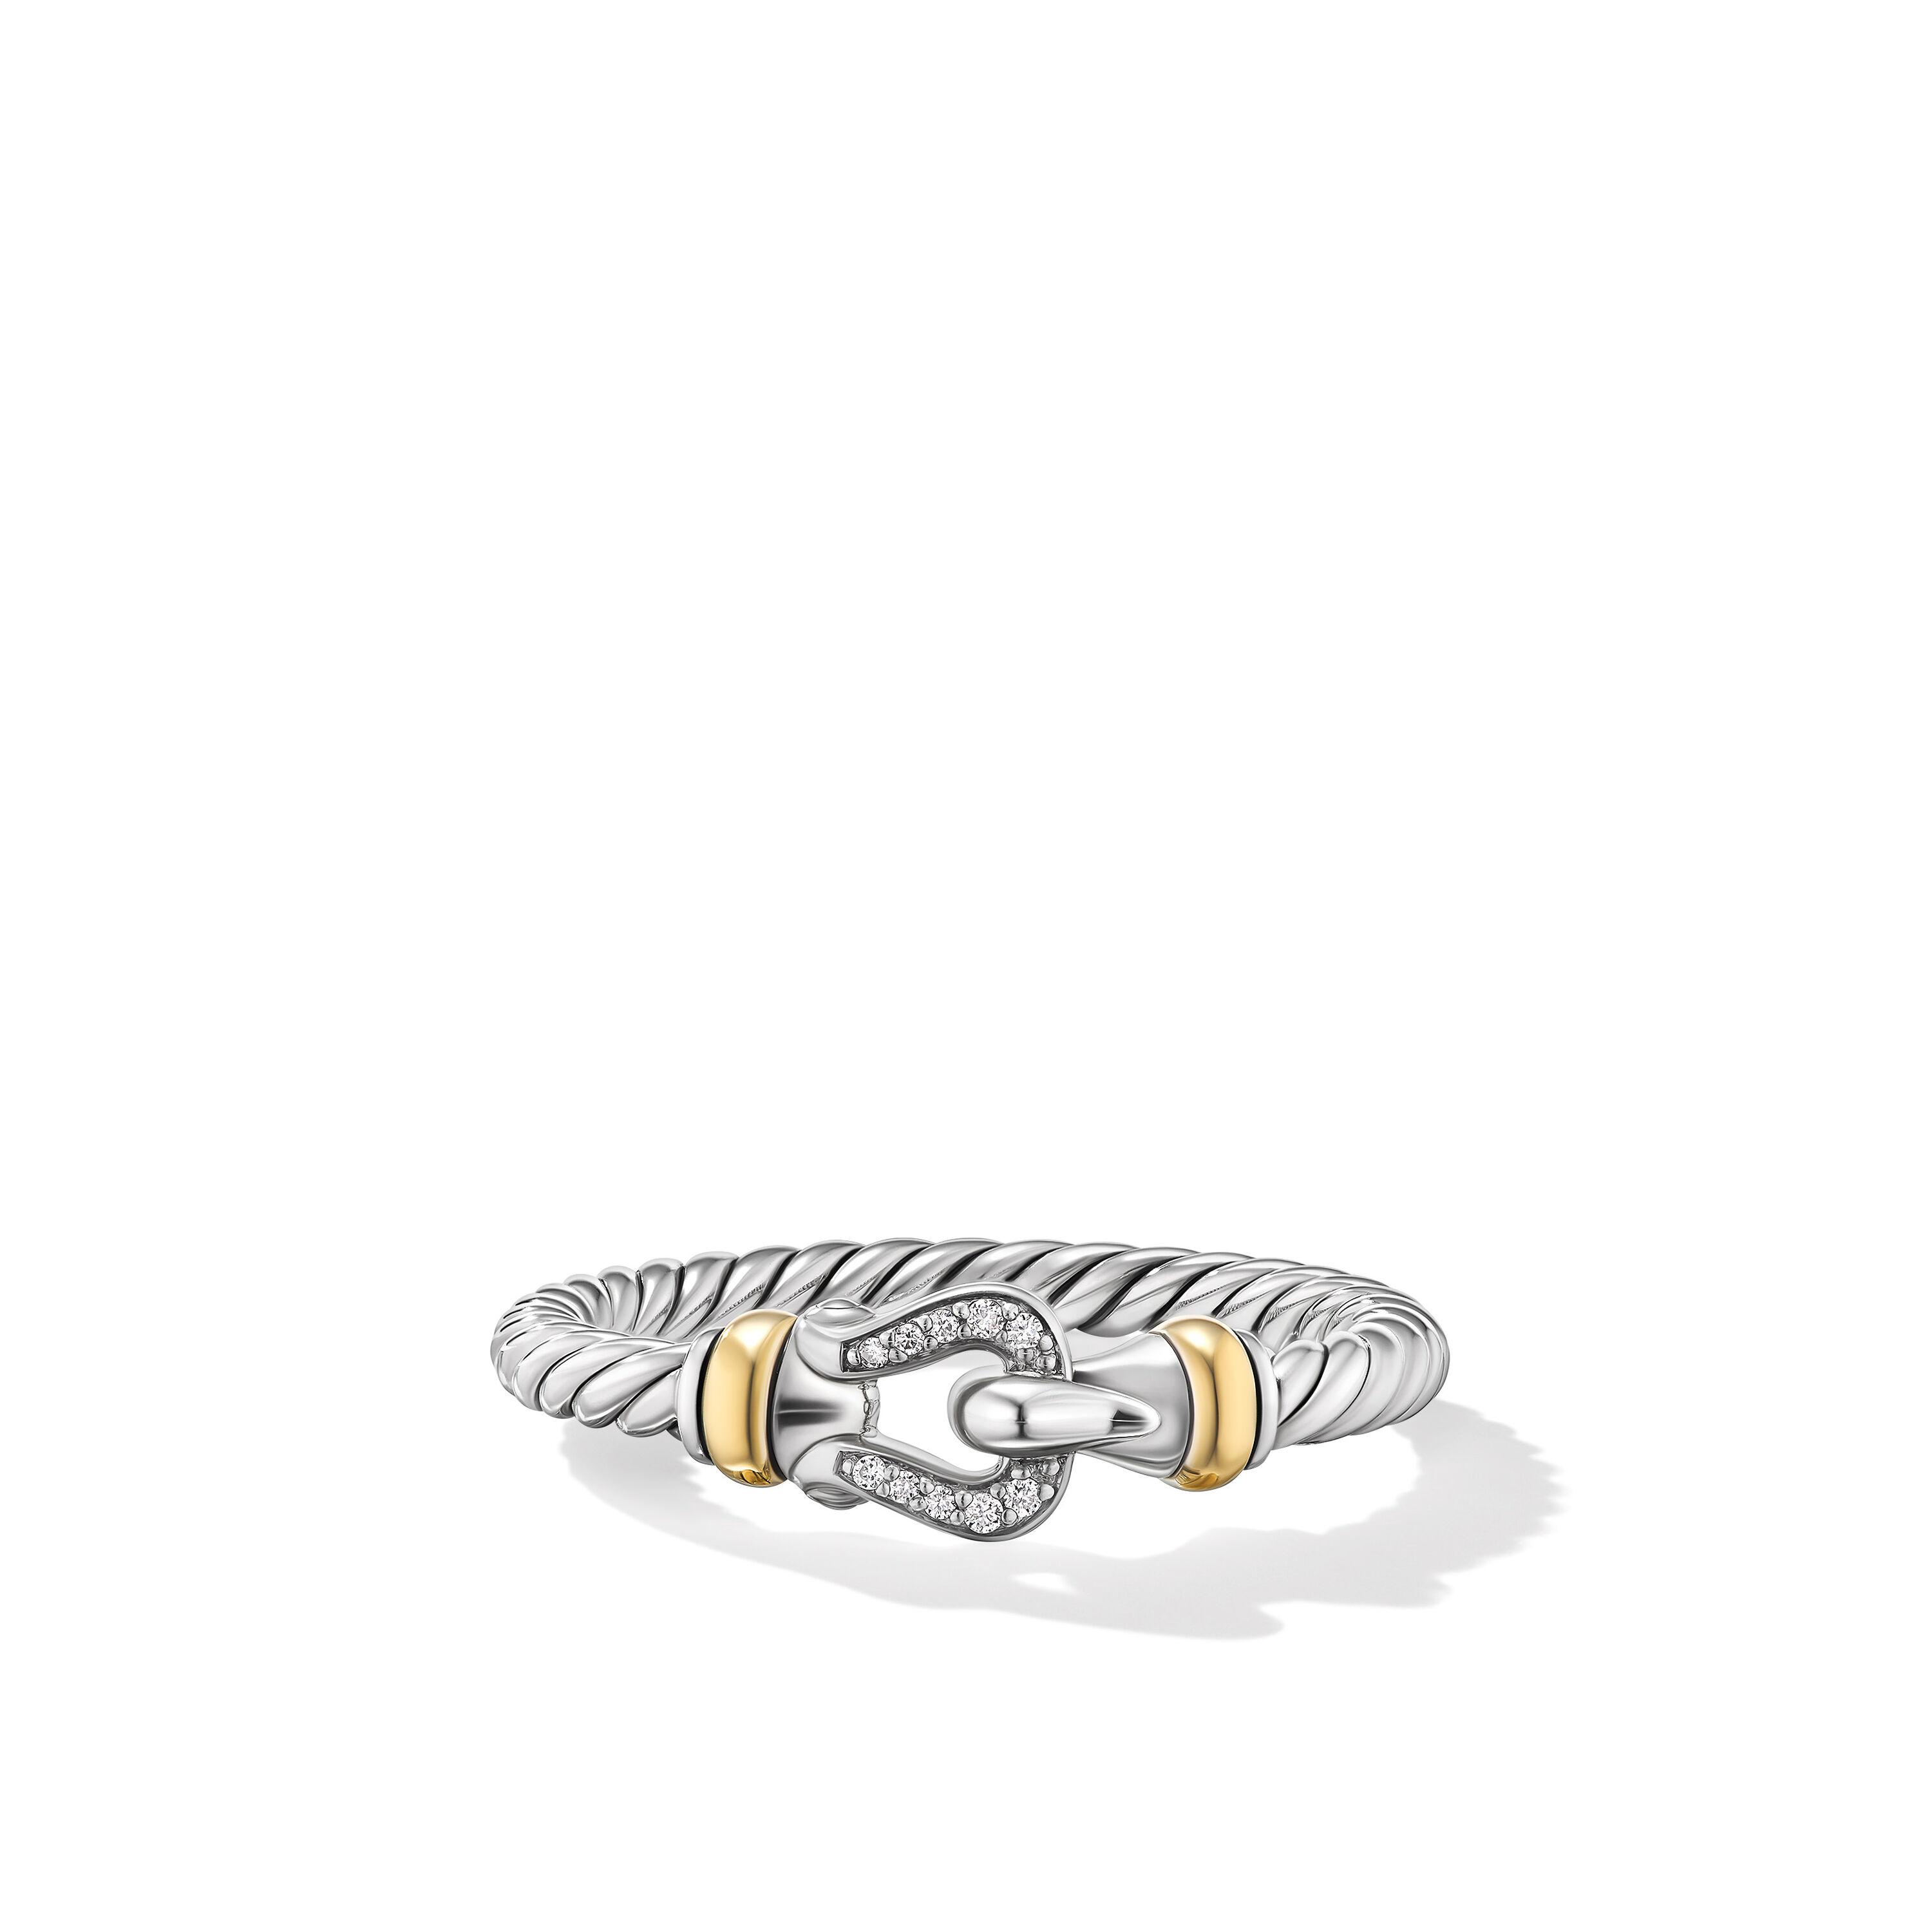 David Yurman Sterling Silver Petite Buckle Ring with 18k Yellow Gold and Diamonds, Size 7 0